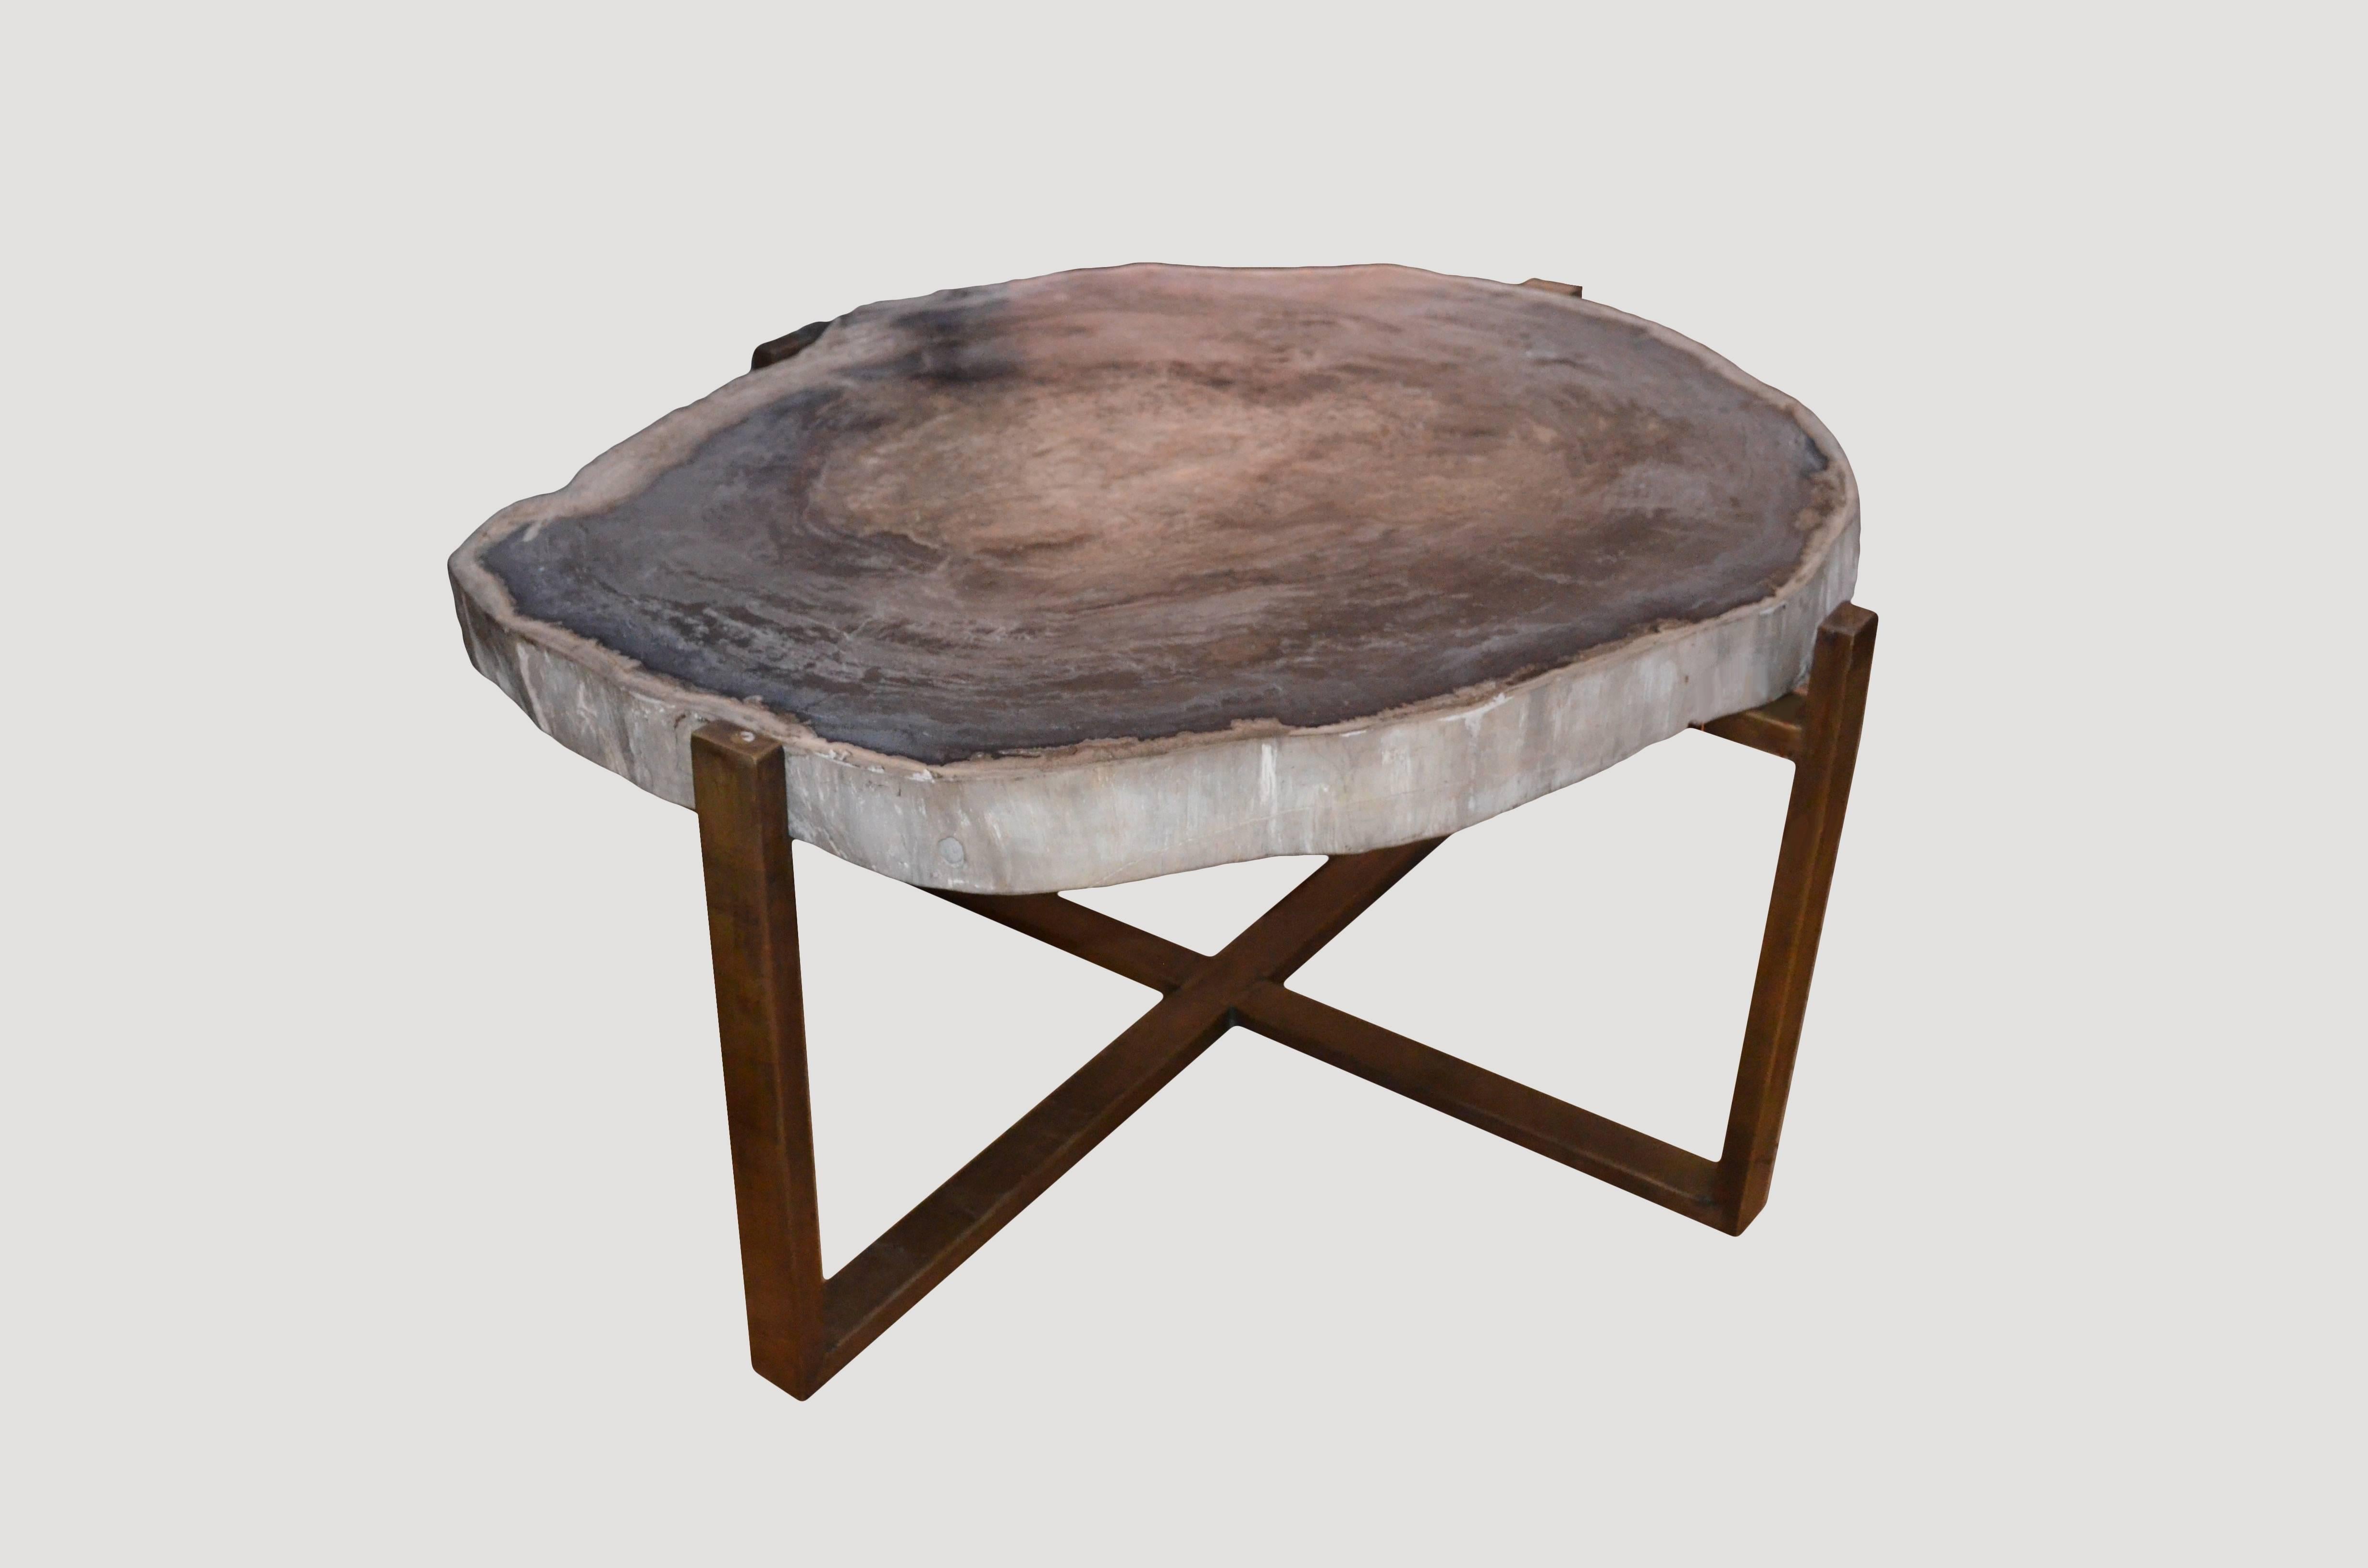 Indonesian Grey and Beige Petrified Wood Slab Table